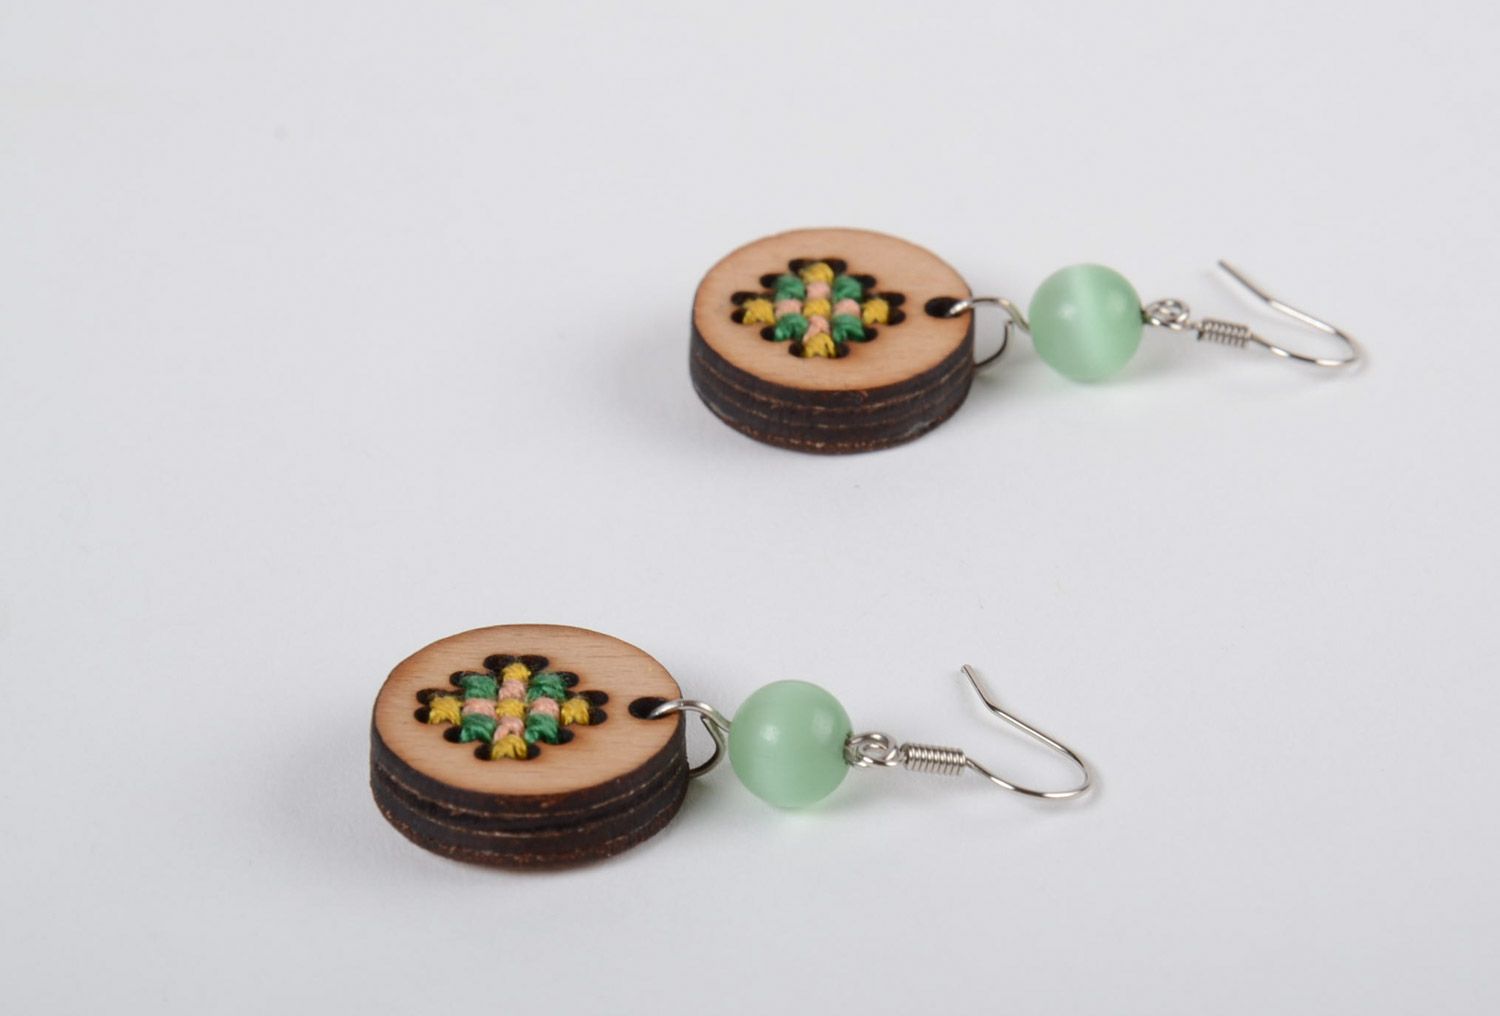 Handmade plywood earrings with cross stitch embroidery and beads in ethnic style photo 2